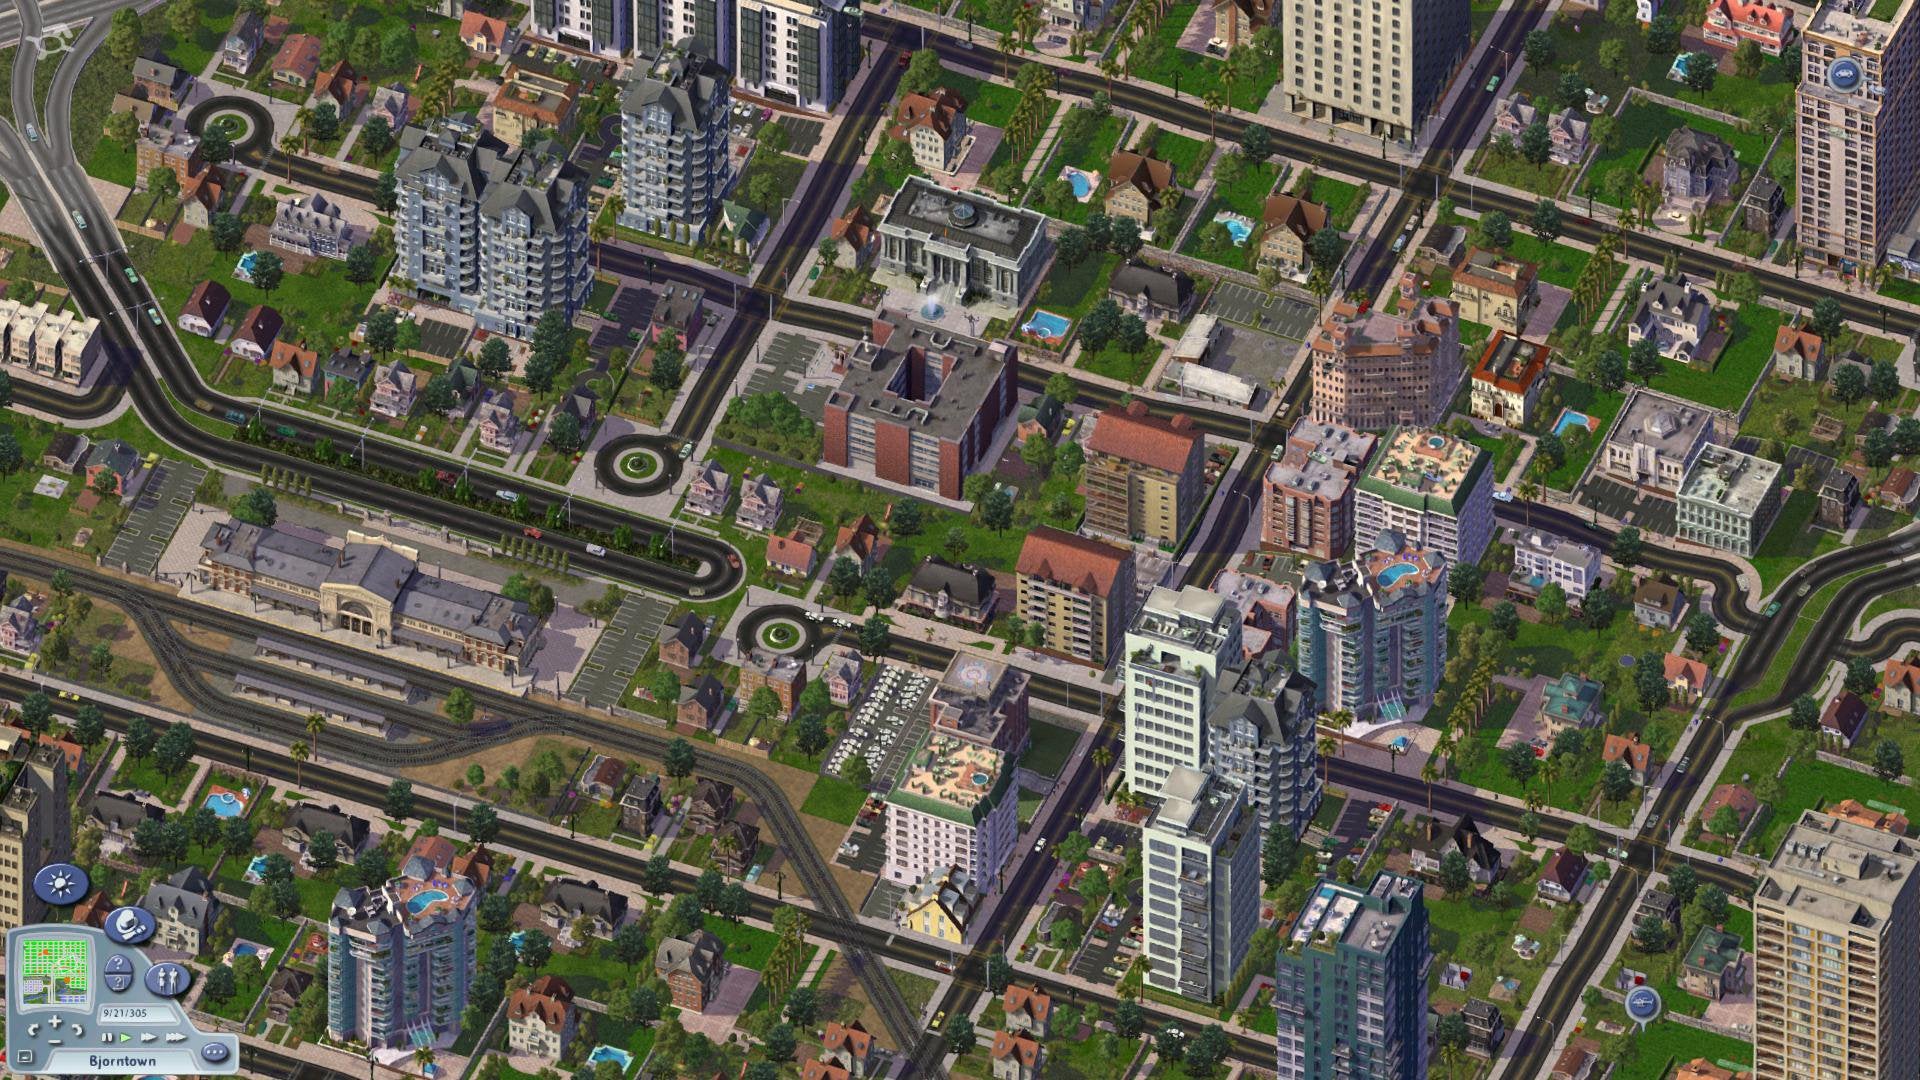 SimCity 4, the greatest citybuilder of all time, was released 20